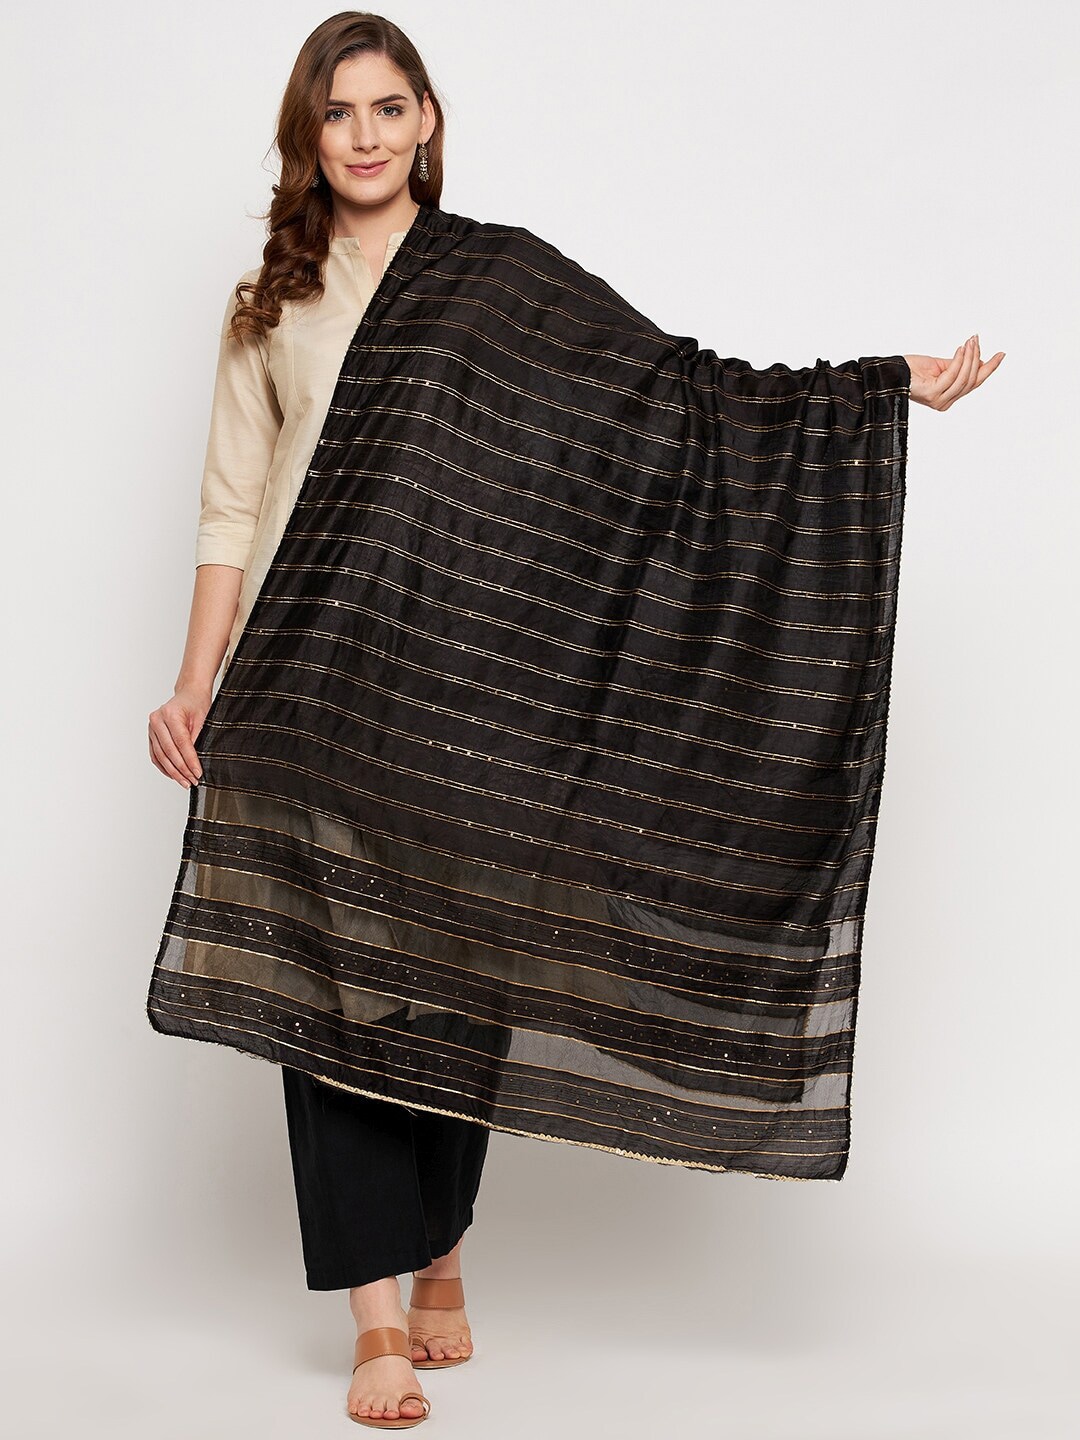 Clora Creation Black & Silver-Toned Printed Dupatta with Sequinned Price in India